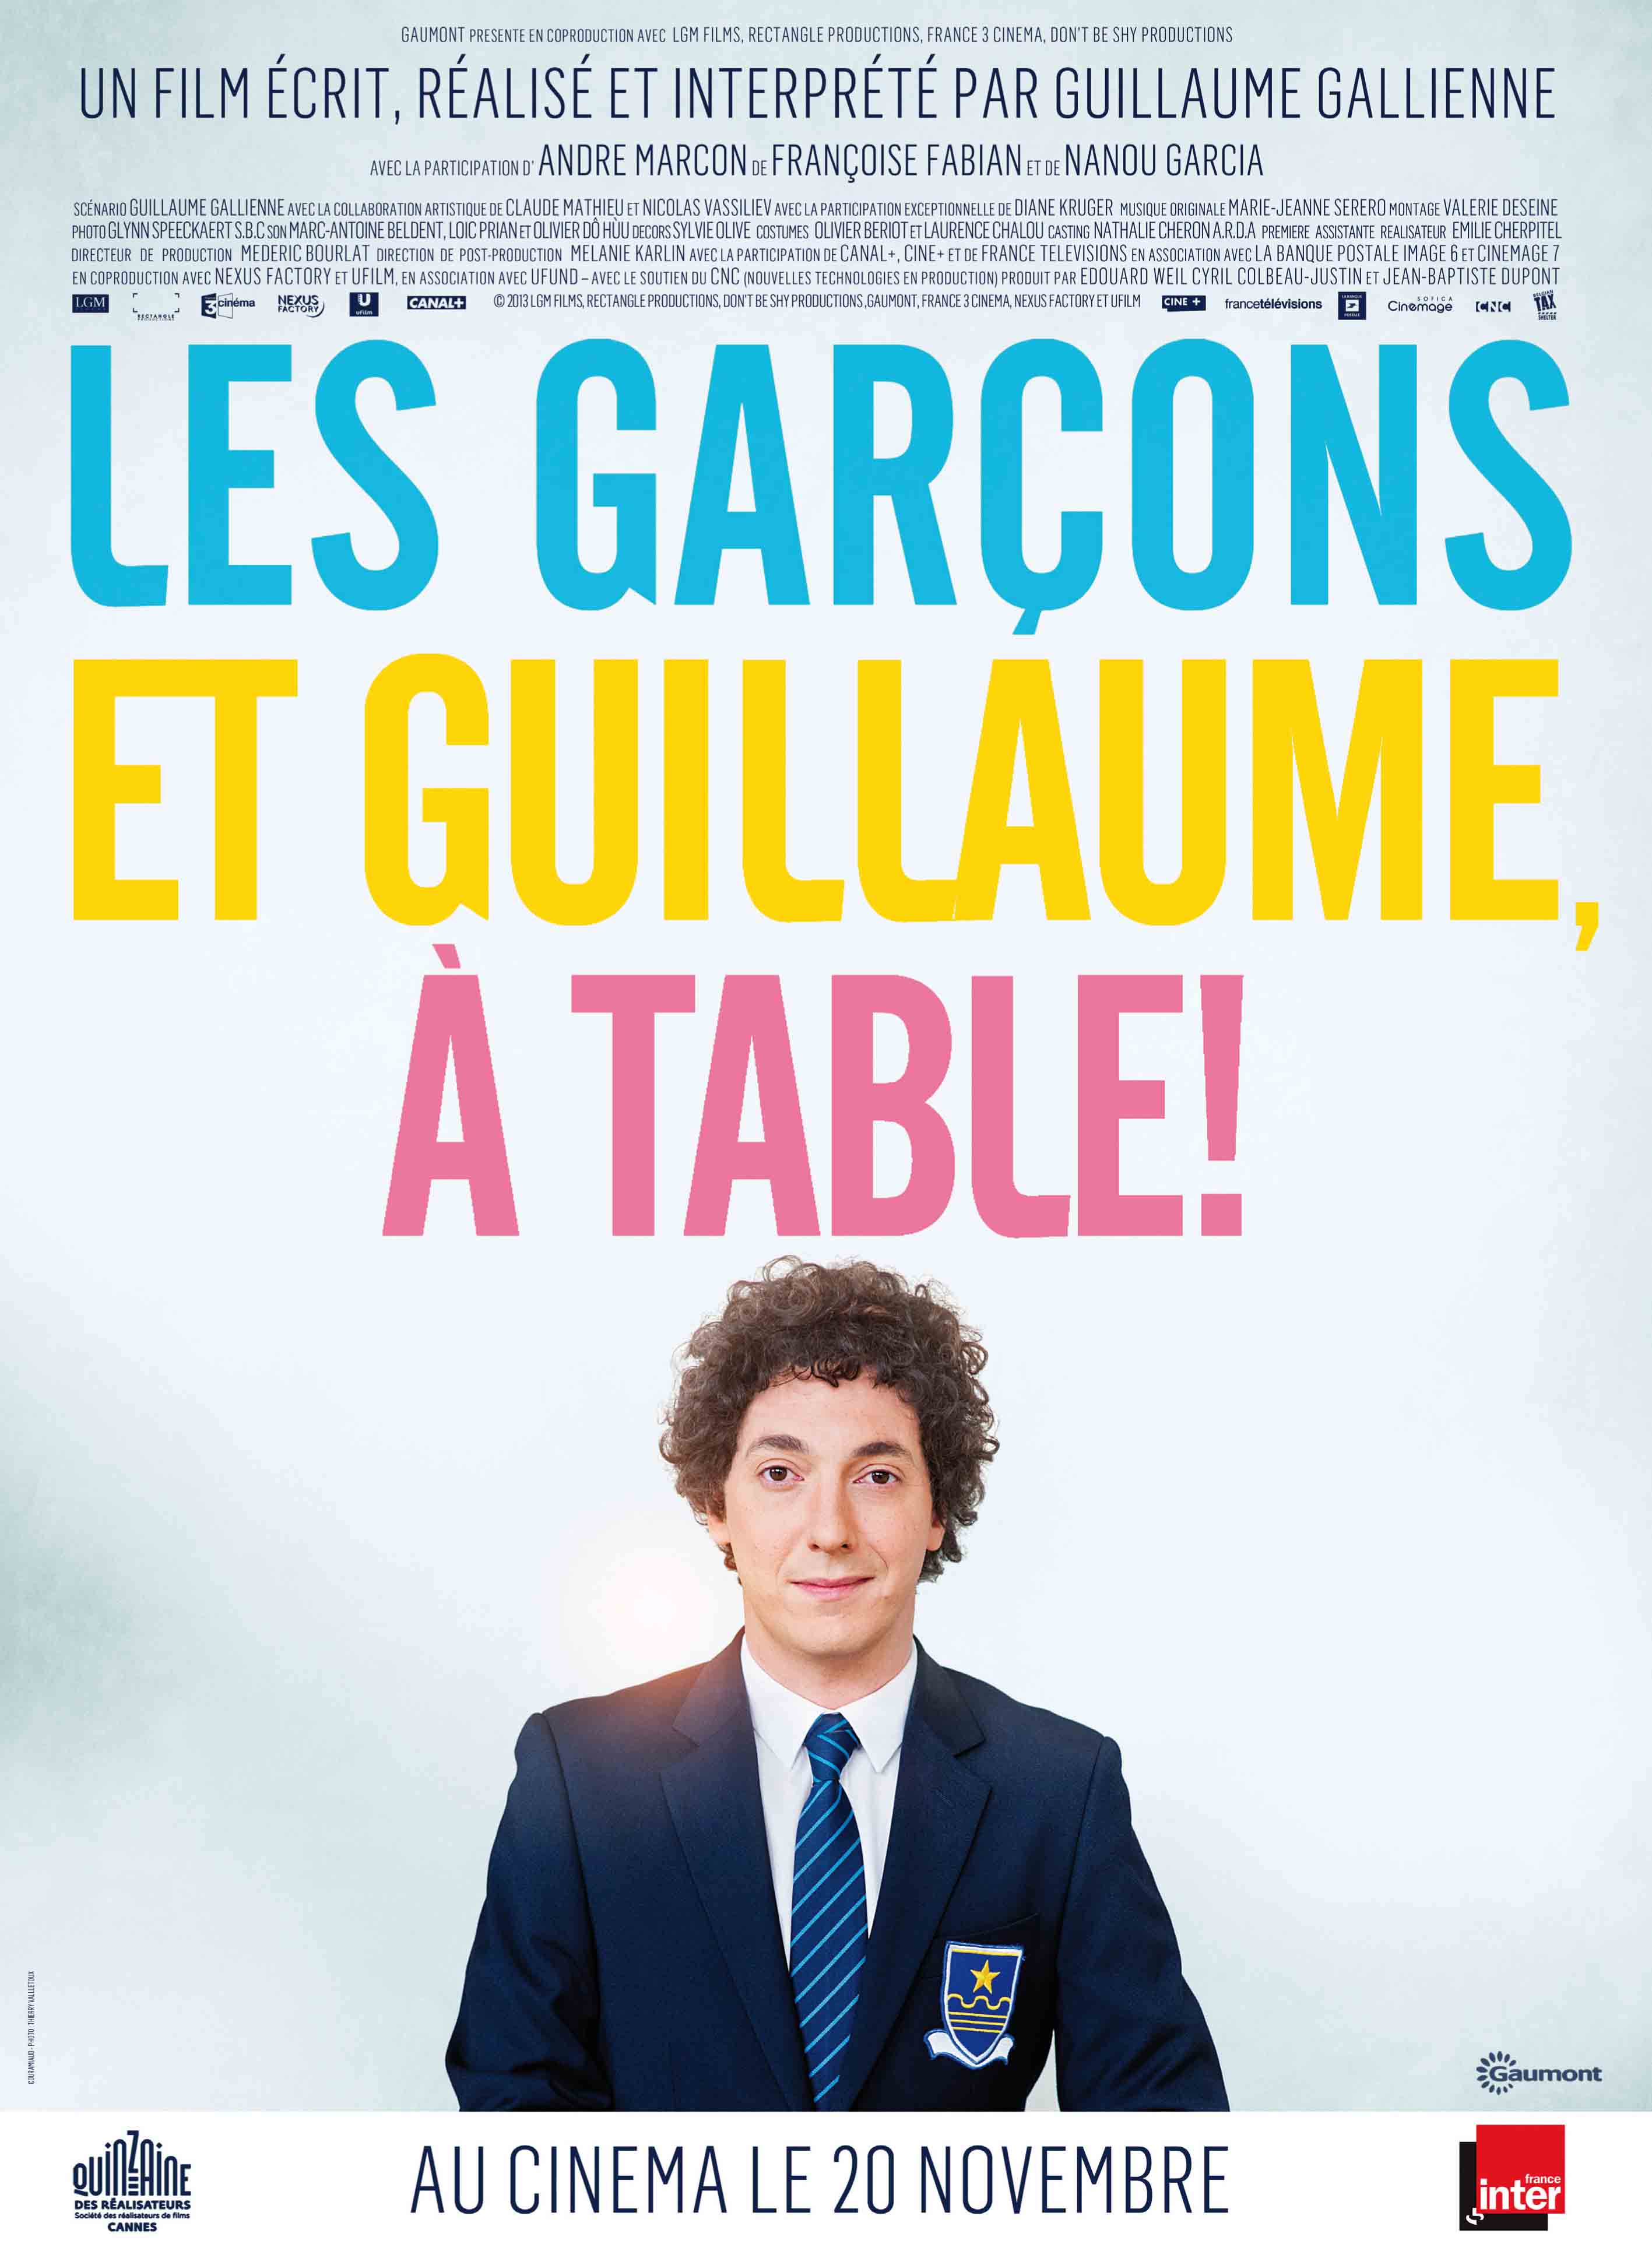 2013-10-17_12-26-56_120x160_affiche_GUILLAUME_A_TABLLE_ok